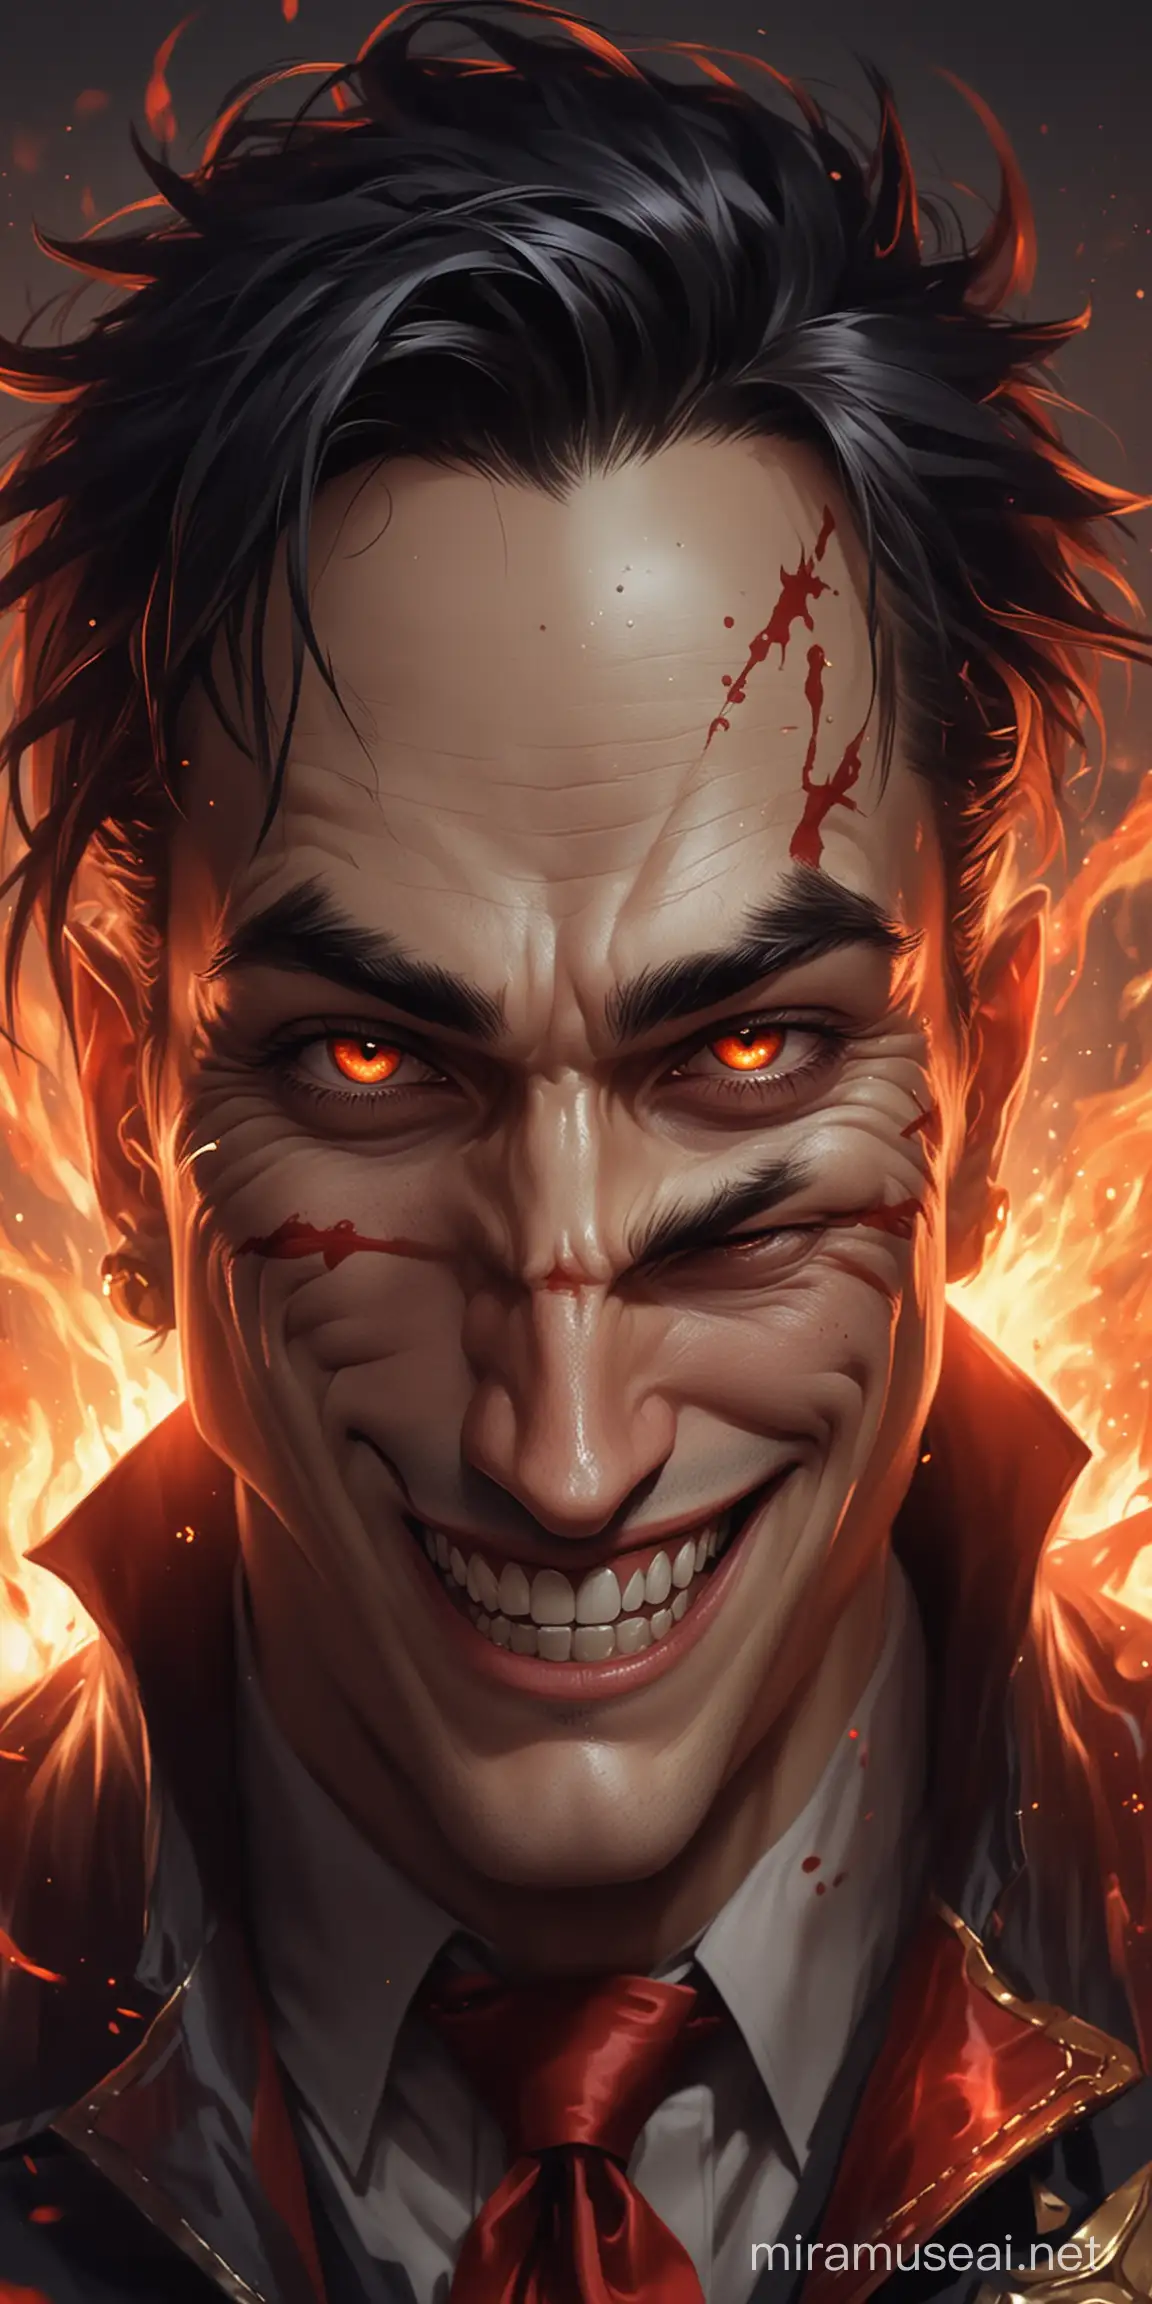 The man who looks like the Joker, his teeth are iron gold, he smiles, his eyes shine red, red smoke comes out of his eyes, his hair style is slicked black hair, his eyebrow is cut, his drawing style is League of Legends Arcane.